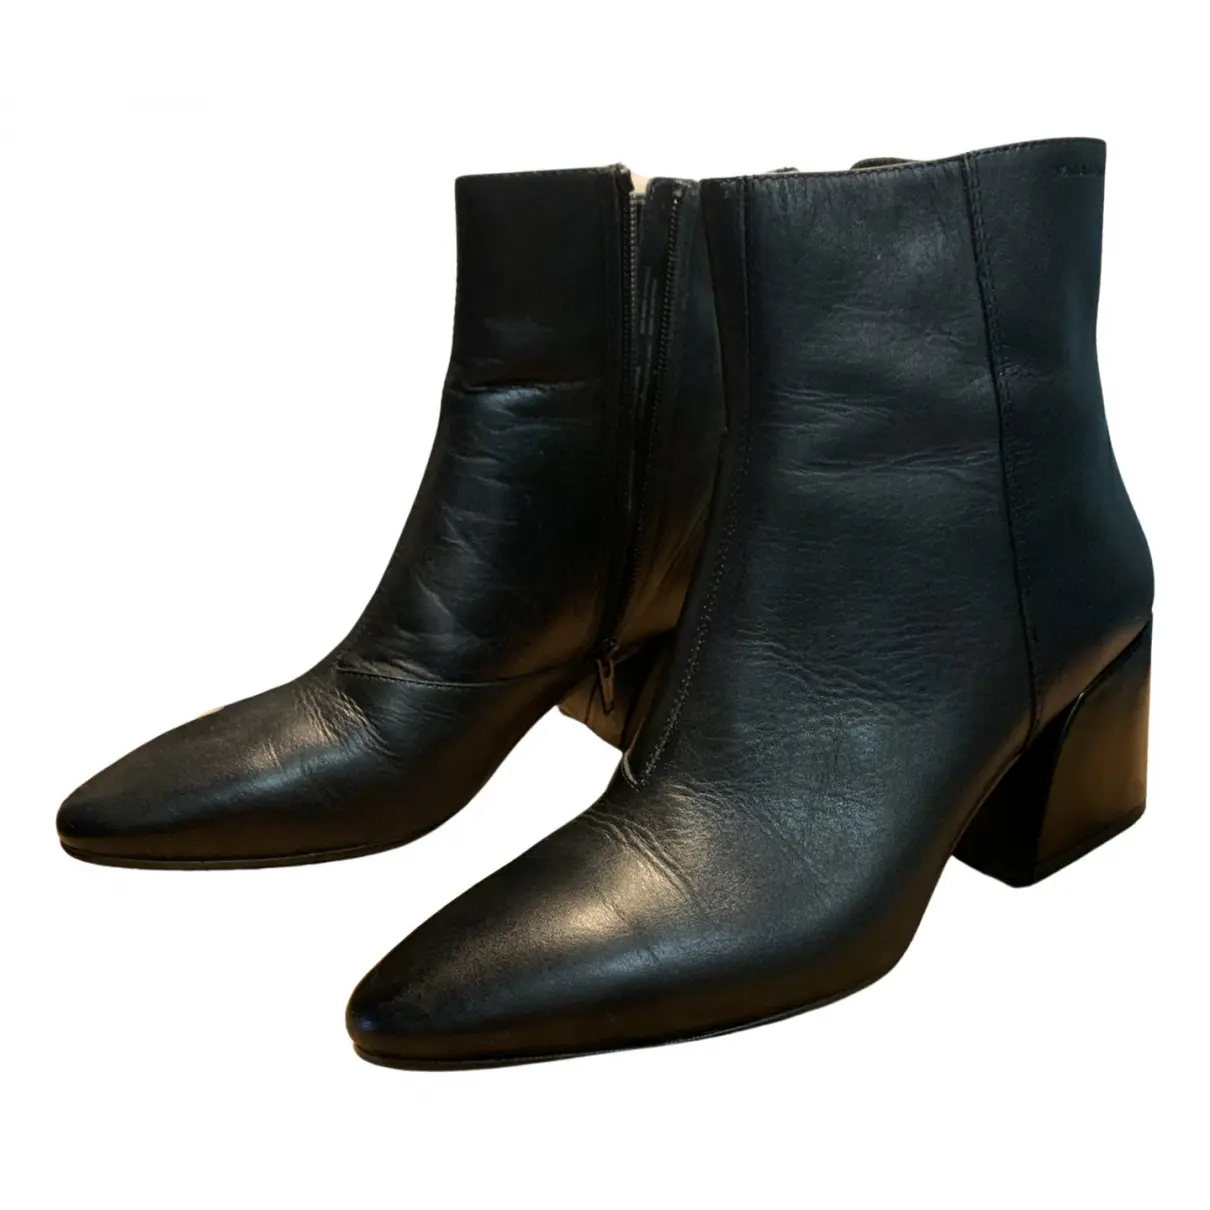 Leather ankle boots Vagabond